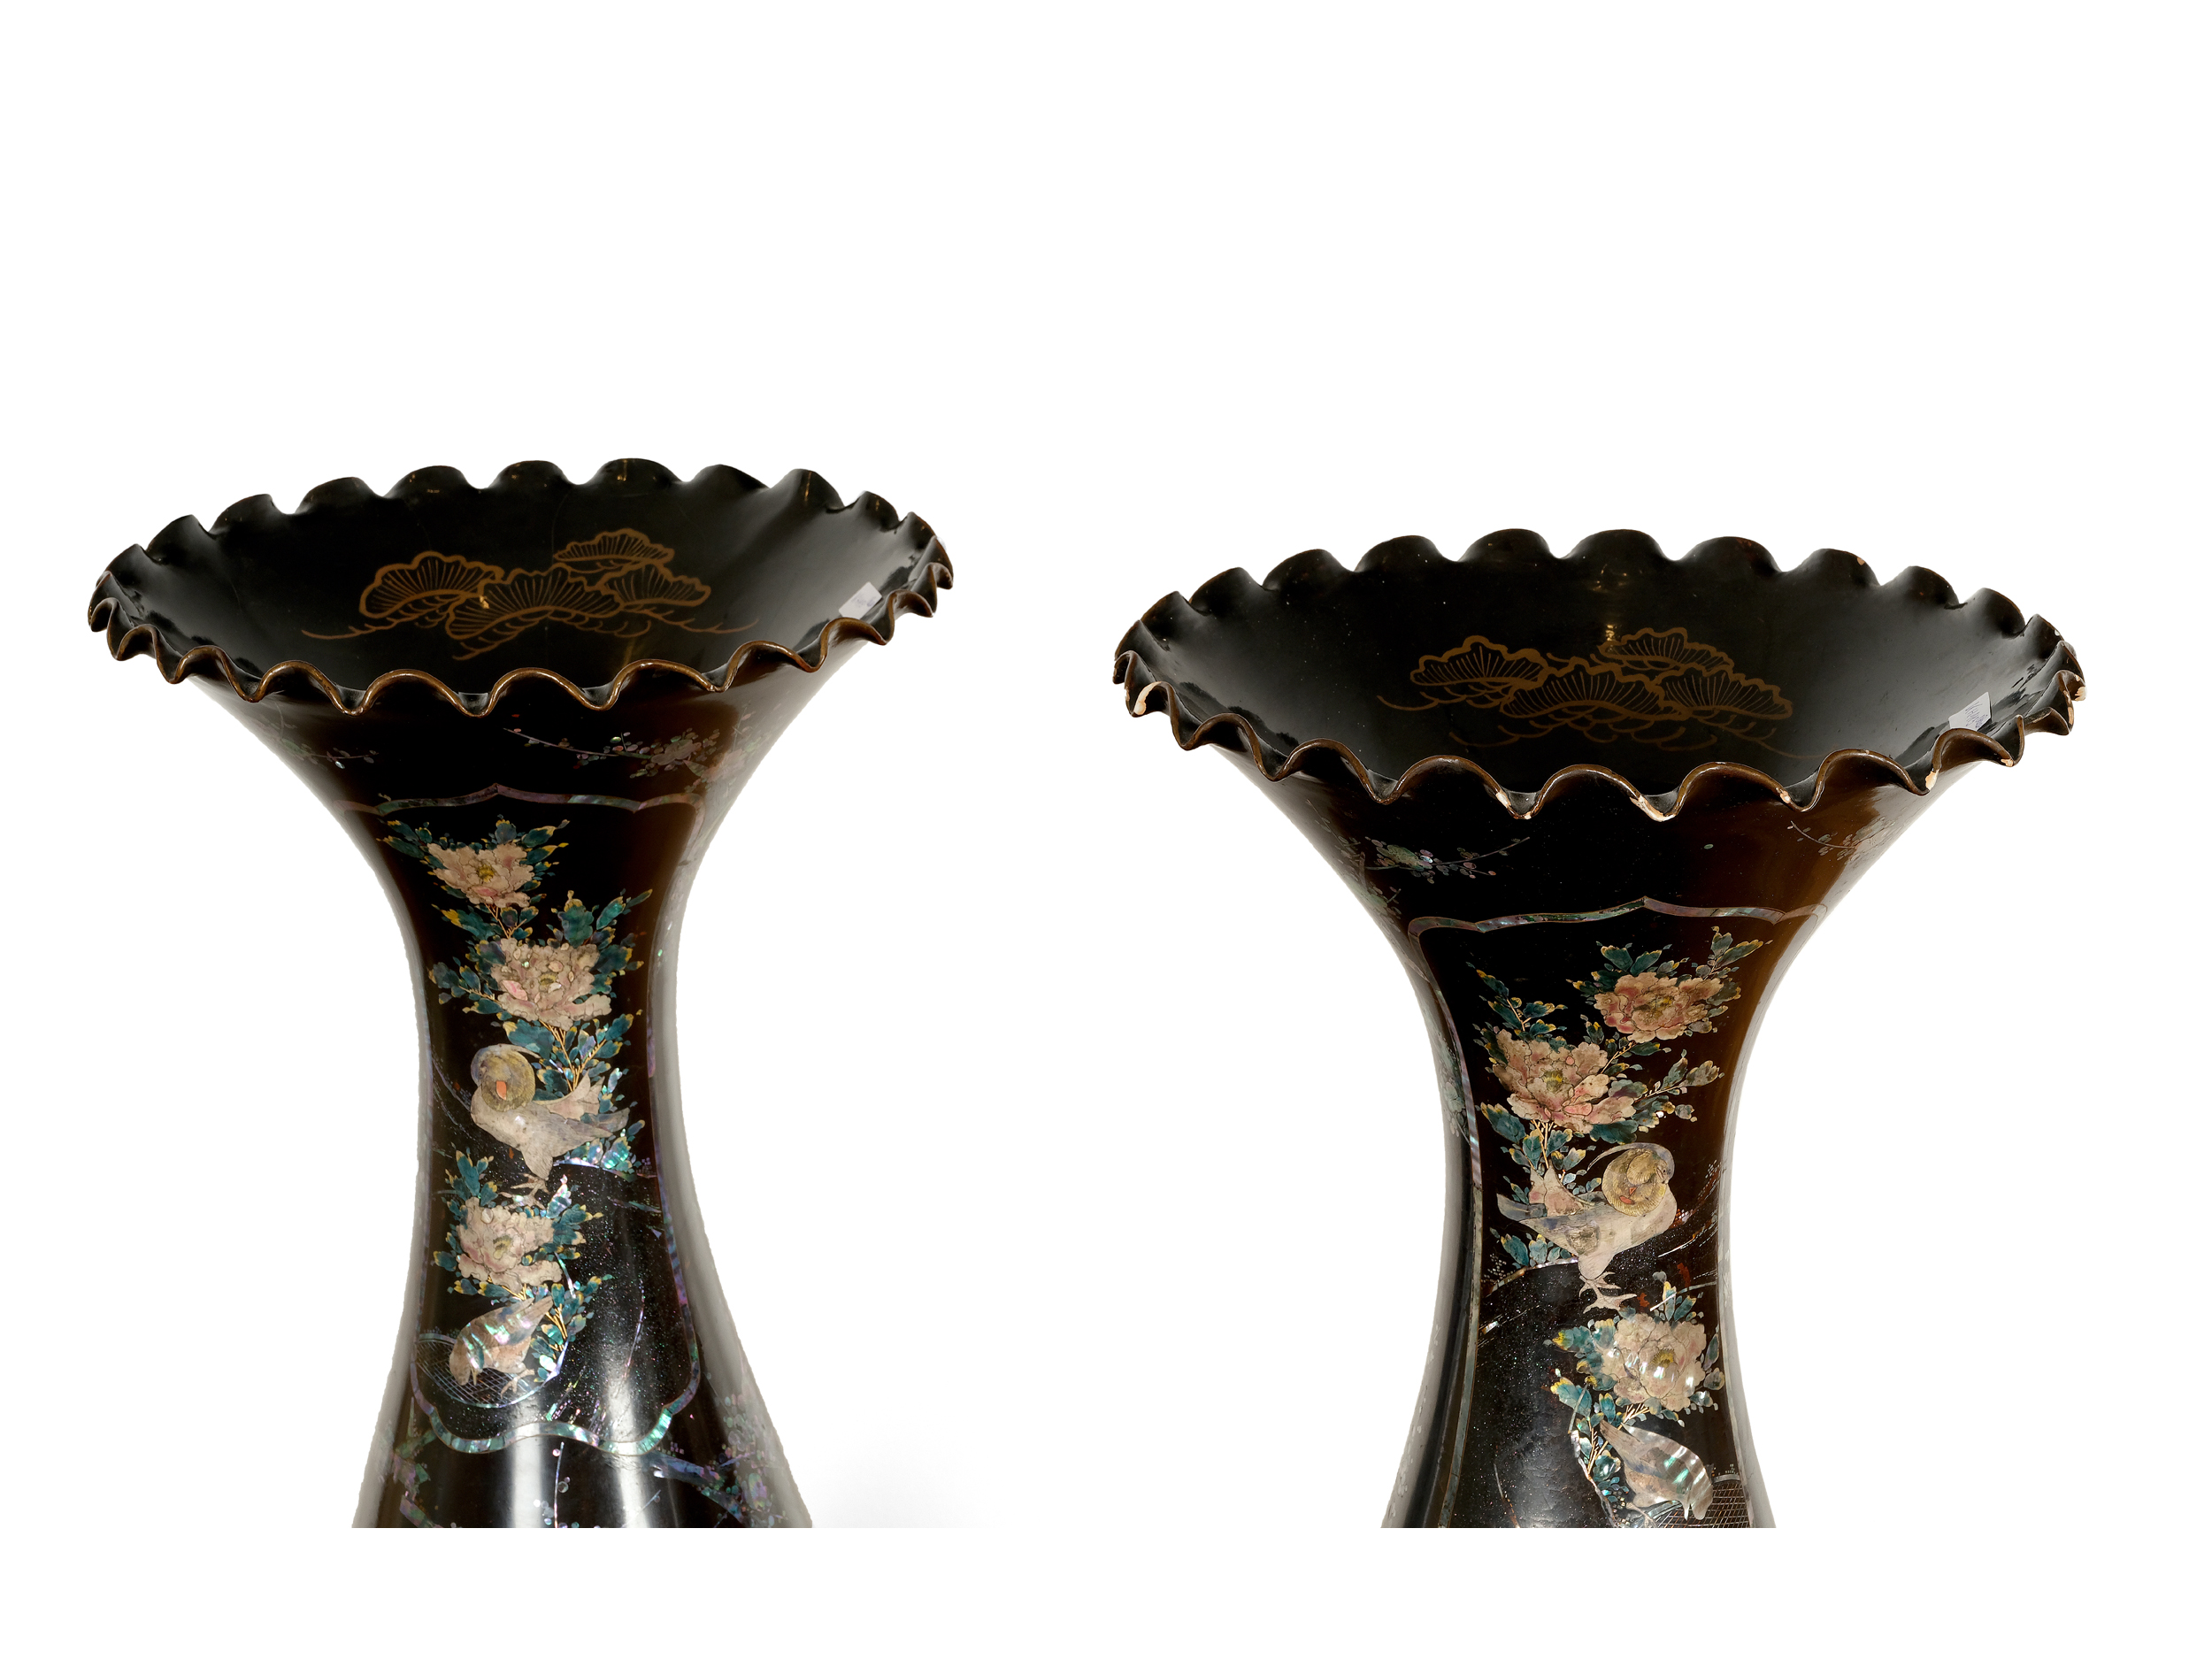 2 large vases, China/Japan?, Ceramic with mother-of-pearl inlays - Image 3 of 4